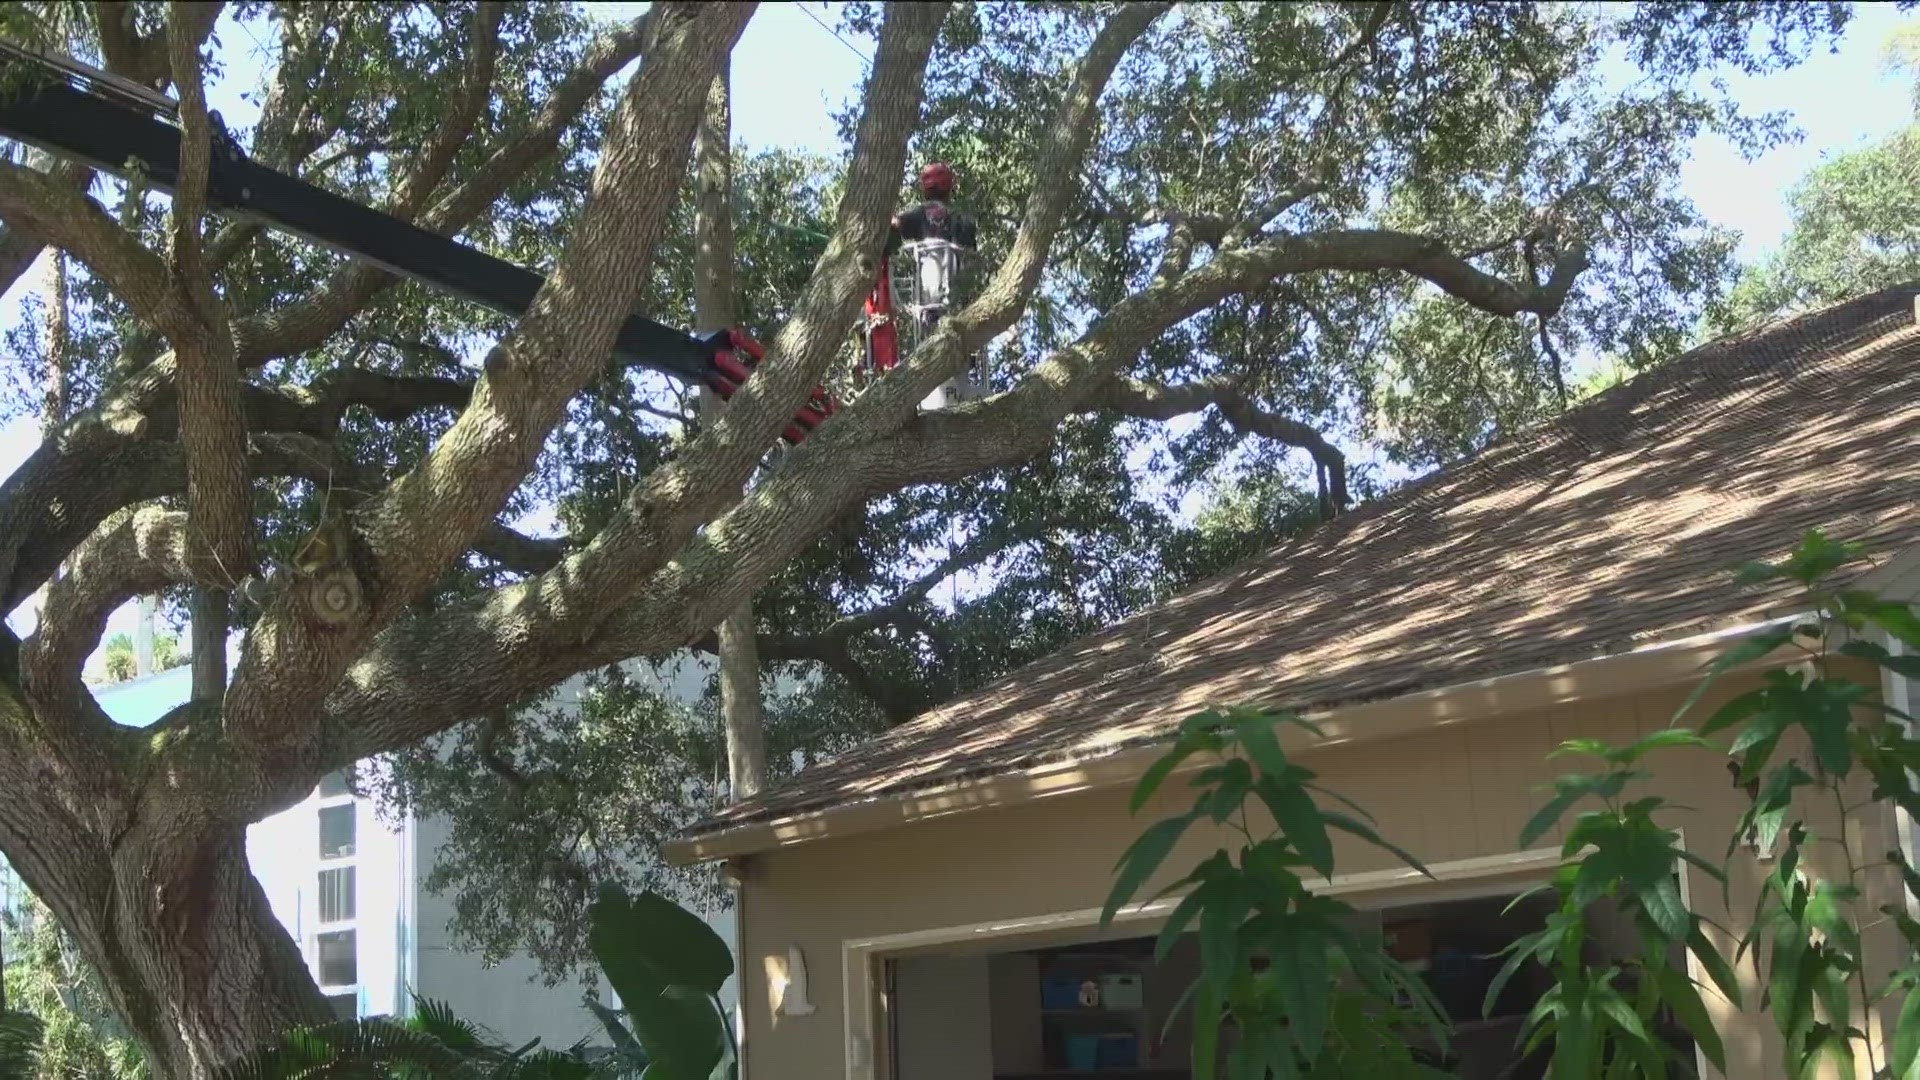 Homeowners are upset at insurance companies saying their policies will be canceled if they don't chop down tree limbs. Here's how to fight back and win.